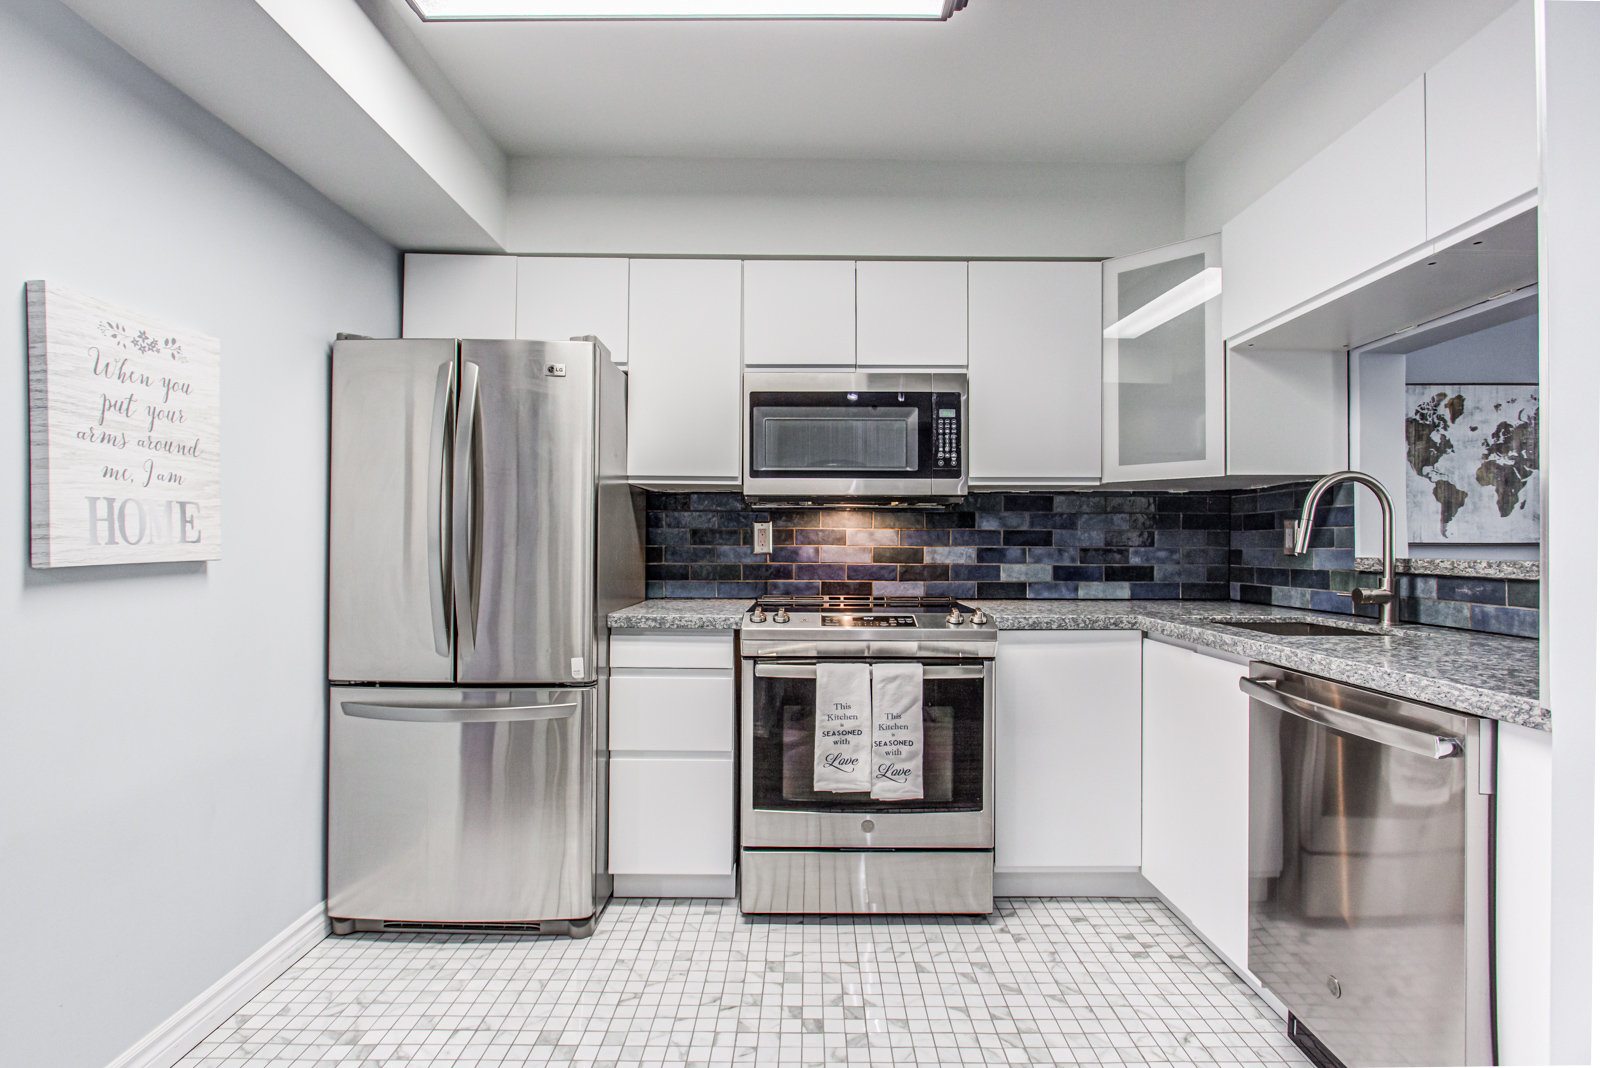 Centered view of new kitchen with gray cabinets and stainless-steel fridge, oven and microwave.